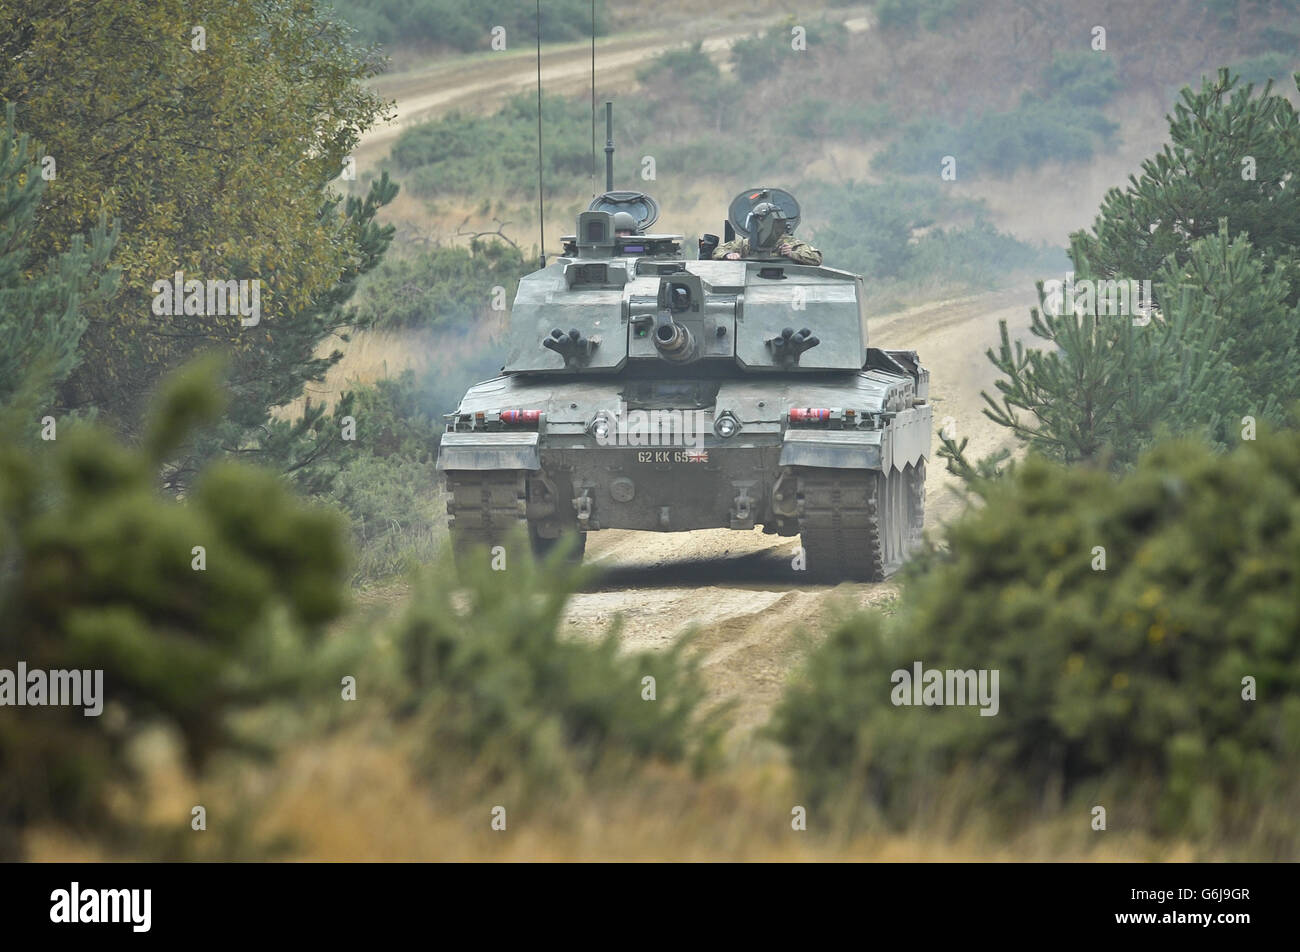 A Challenger 2 Main Battle Tank manned by reservist soldiers from the Royal Wessex Yeomanry (RWxY), the South West???s Army Reserve Cavalry Regiment, pictured while on a live firing exercise at Five Tips Range near Lulworth in Dorset. Stock Photo